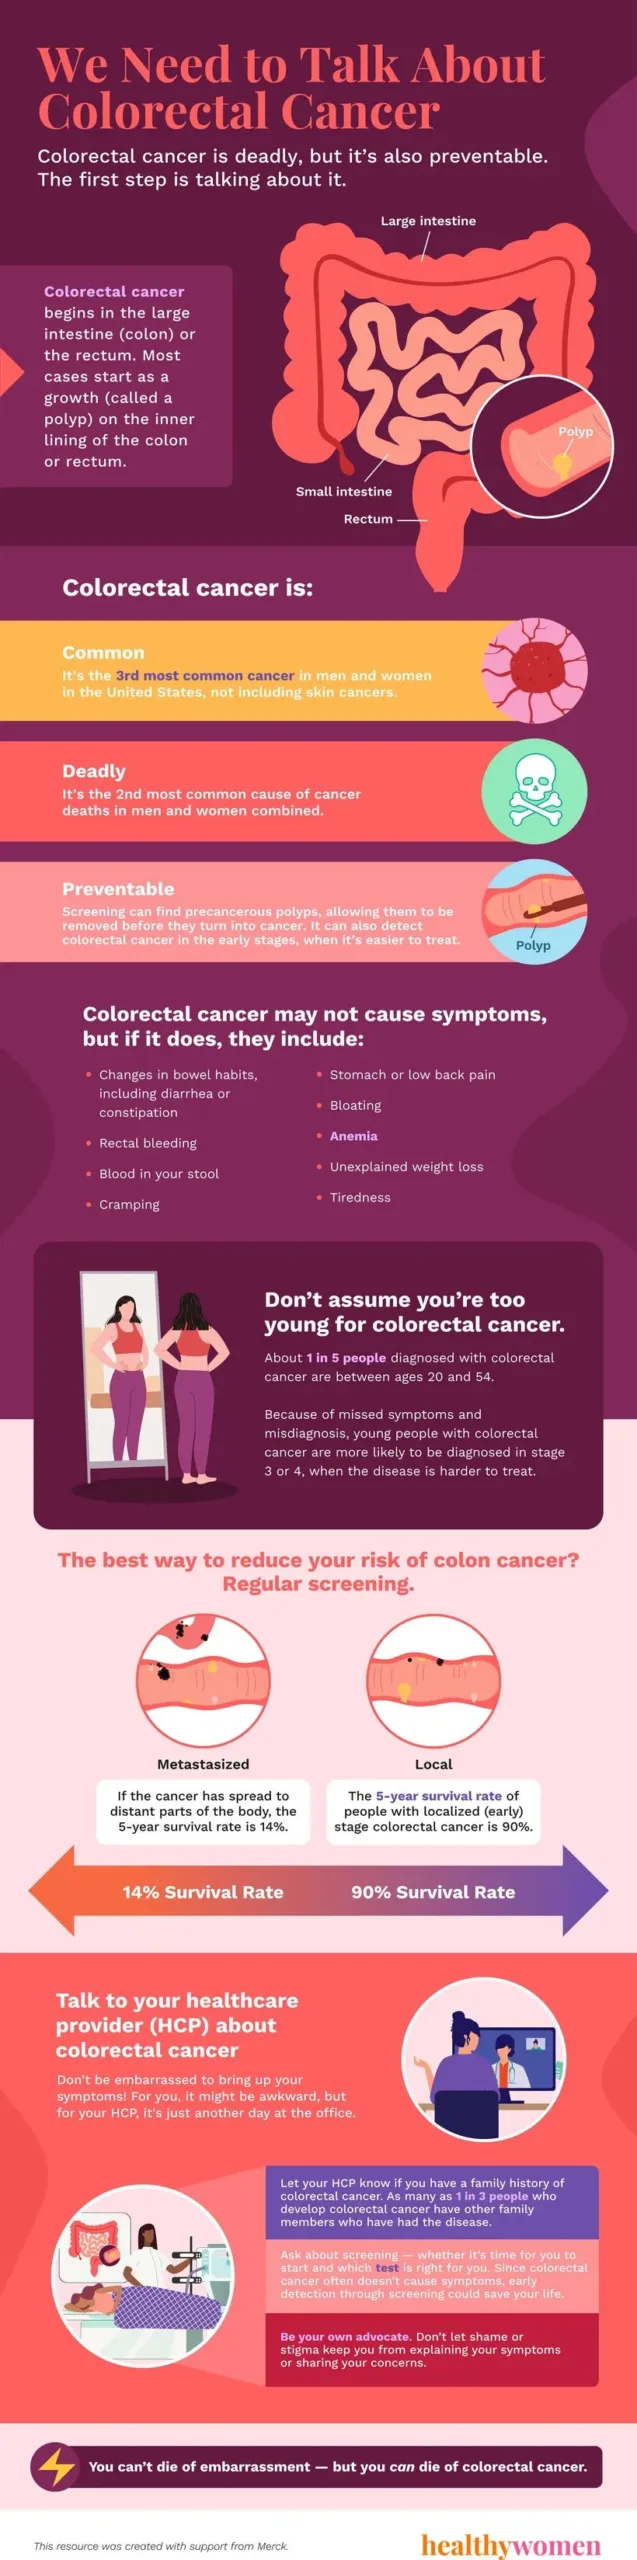 We Need to Talk About Colorectal Cancer Infographic